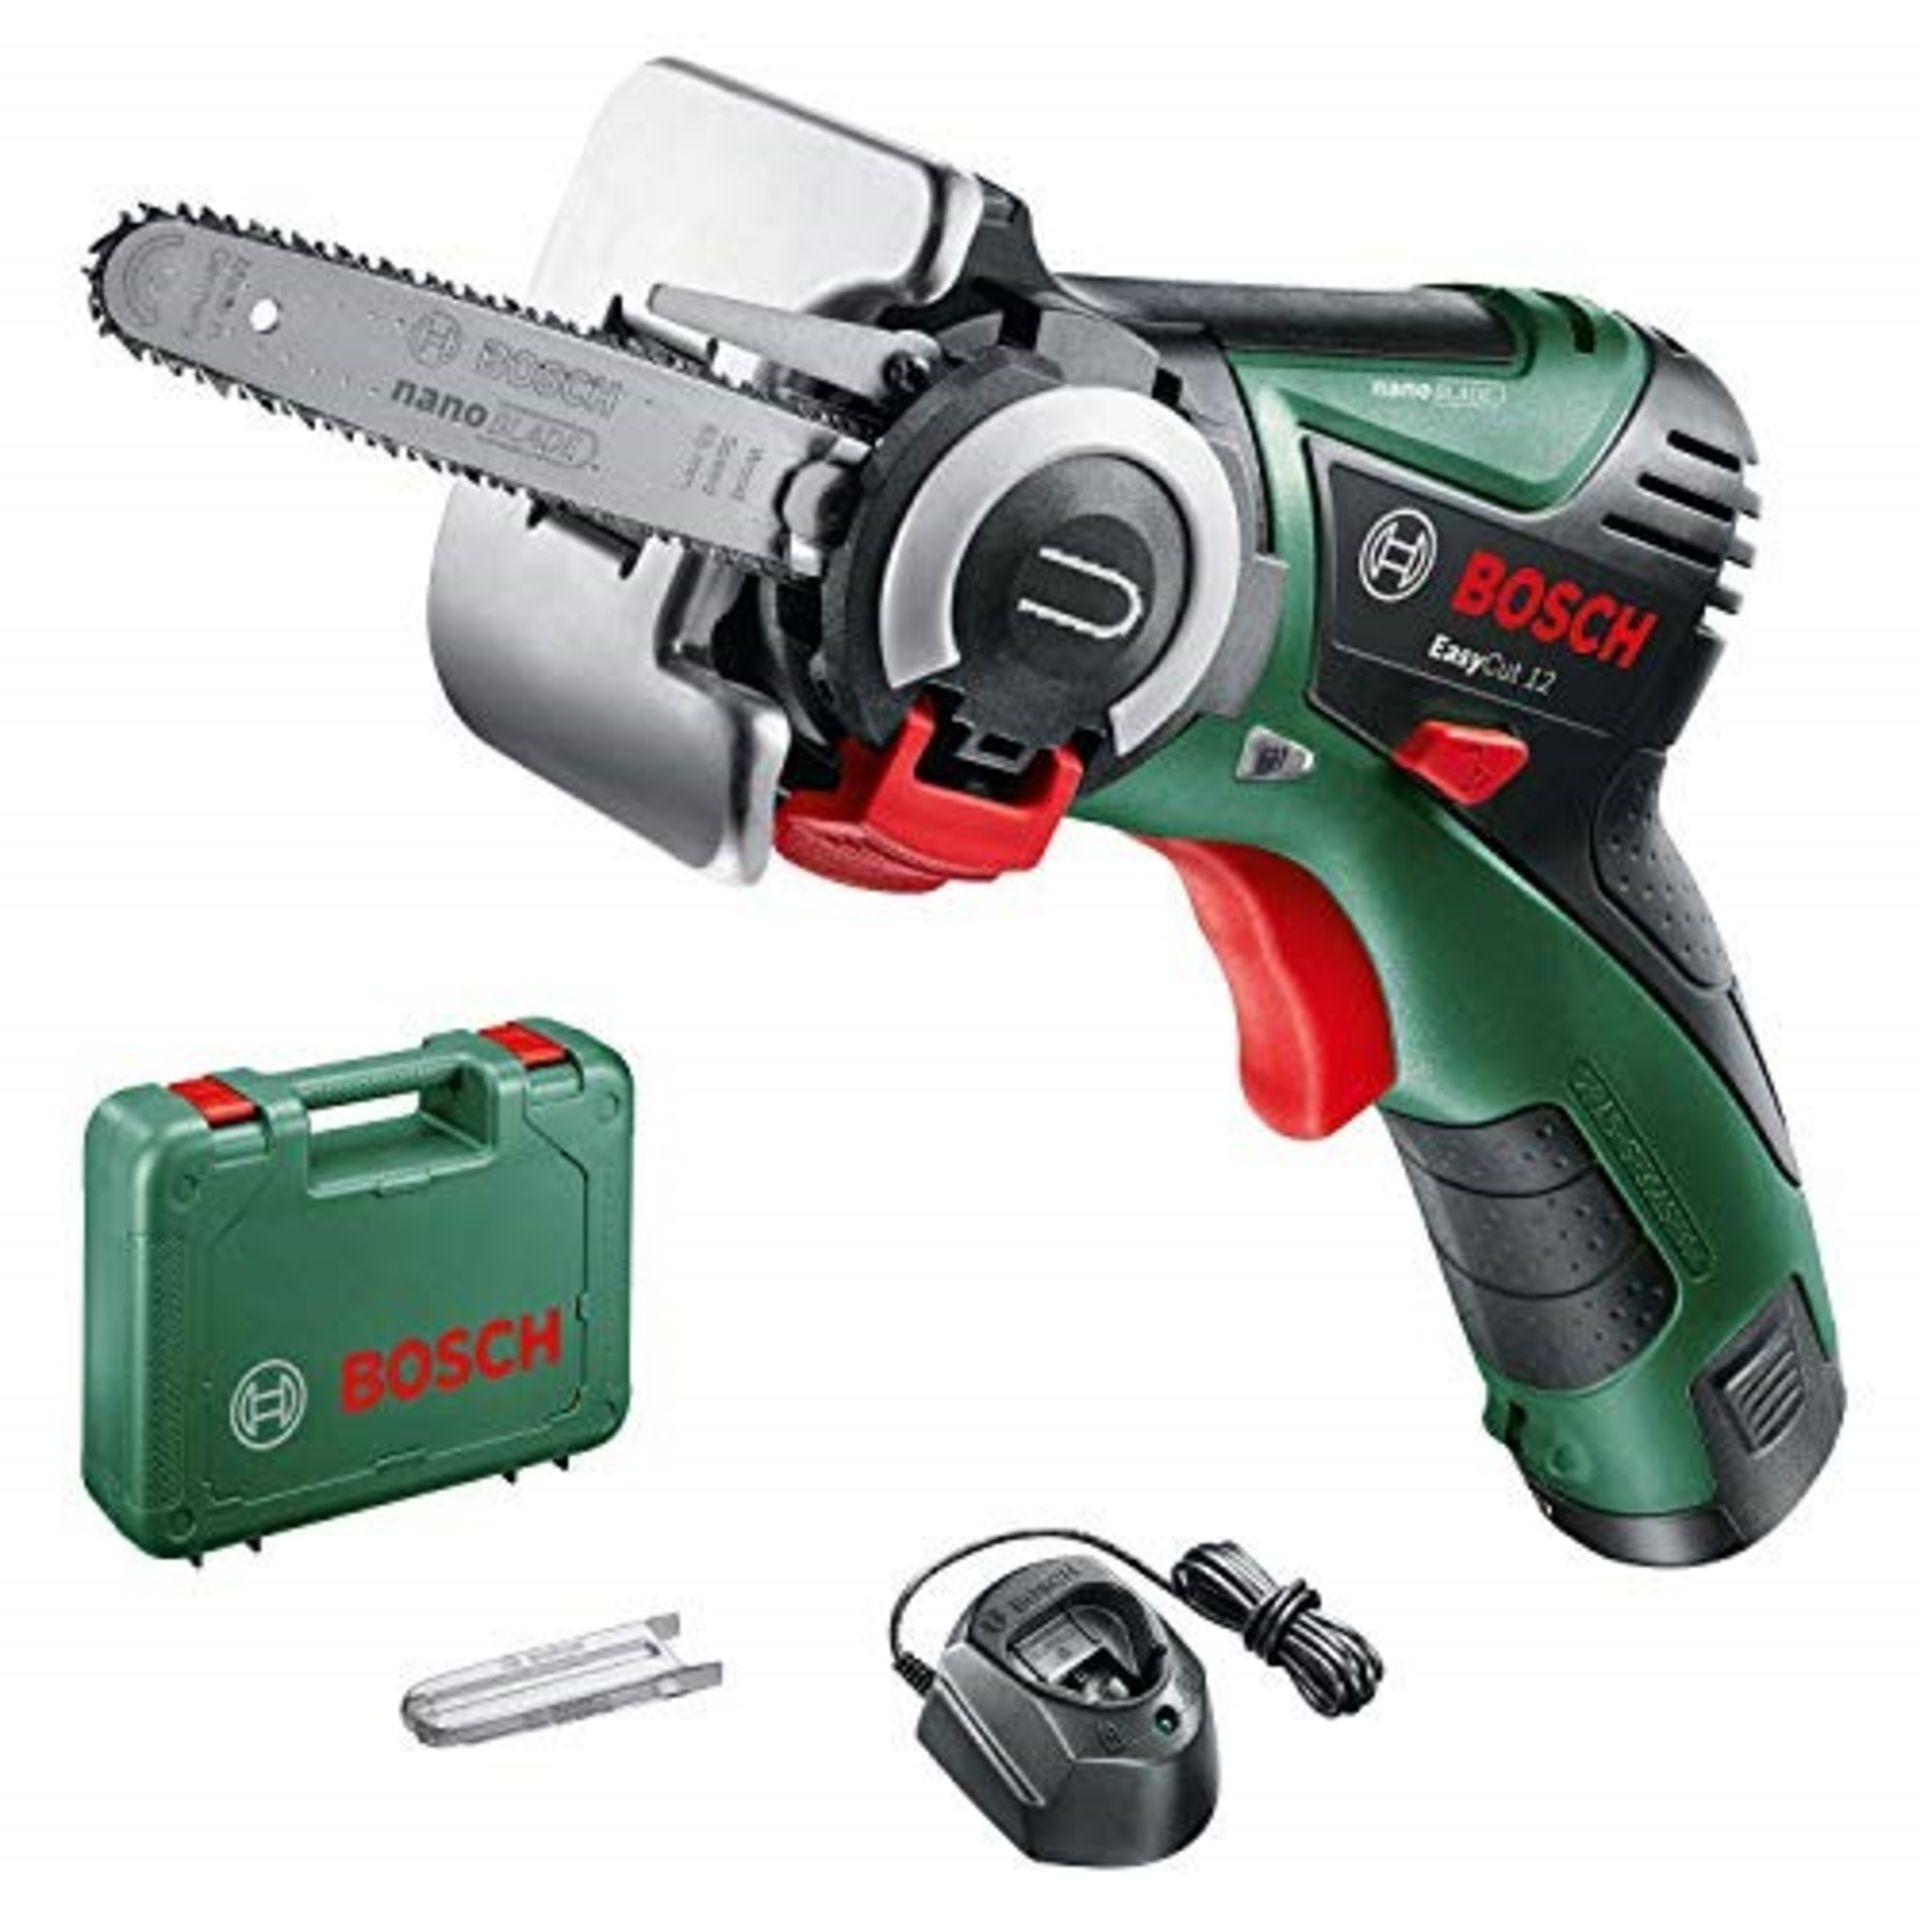 RRP £113.00 Bosch EasyCut 12 Cordless Nano Blade Saw with 12